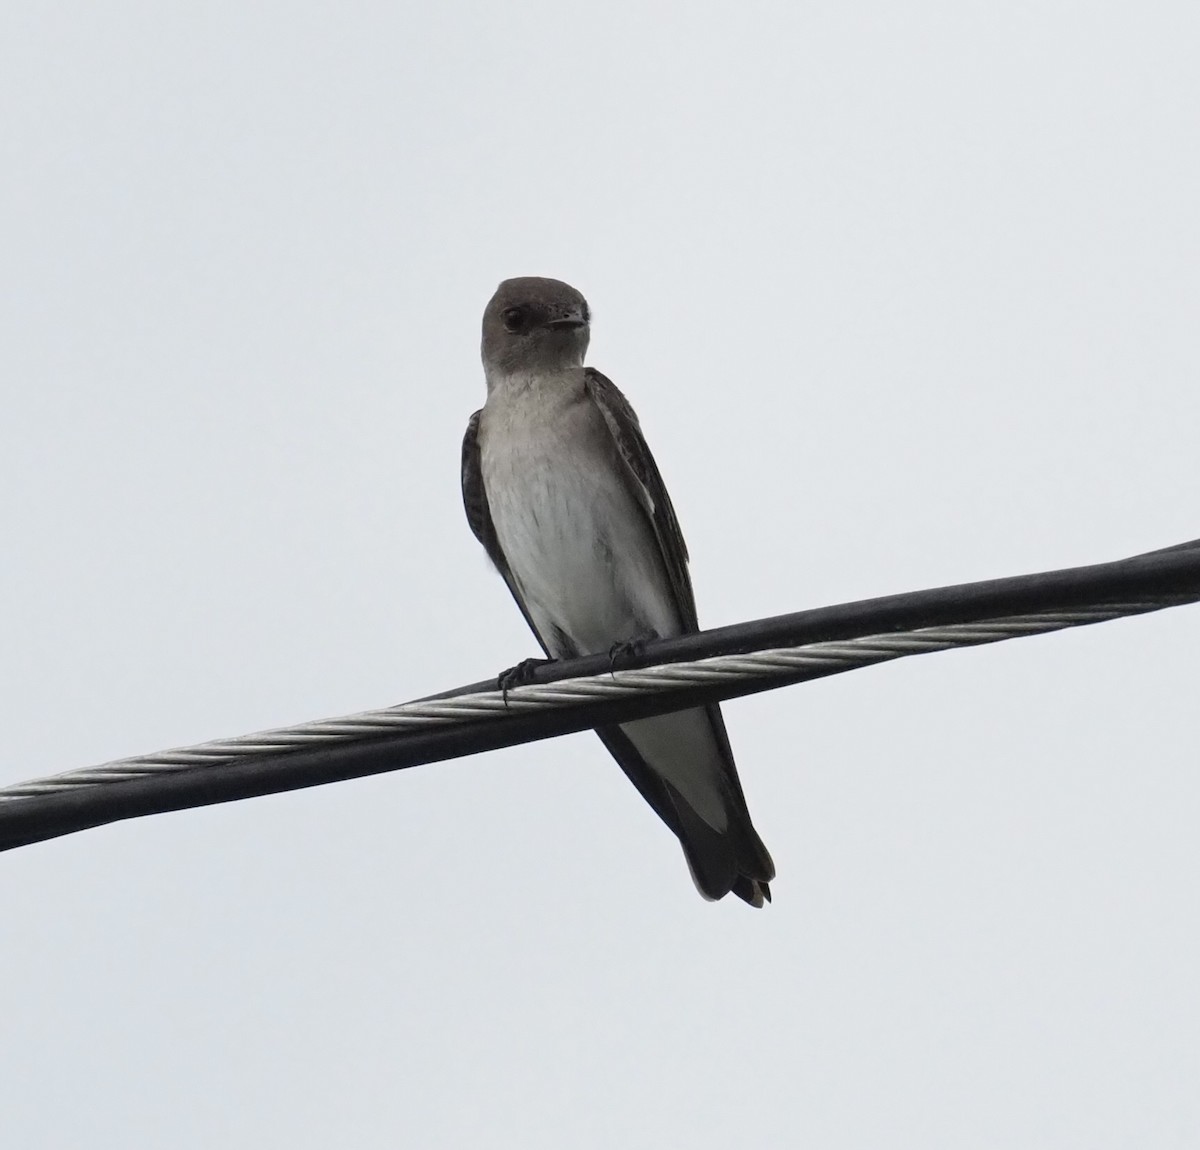 Northern Rough-winged Swallow - Yve Morrell